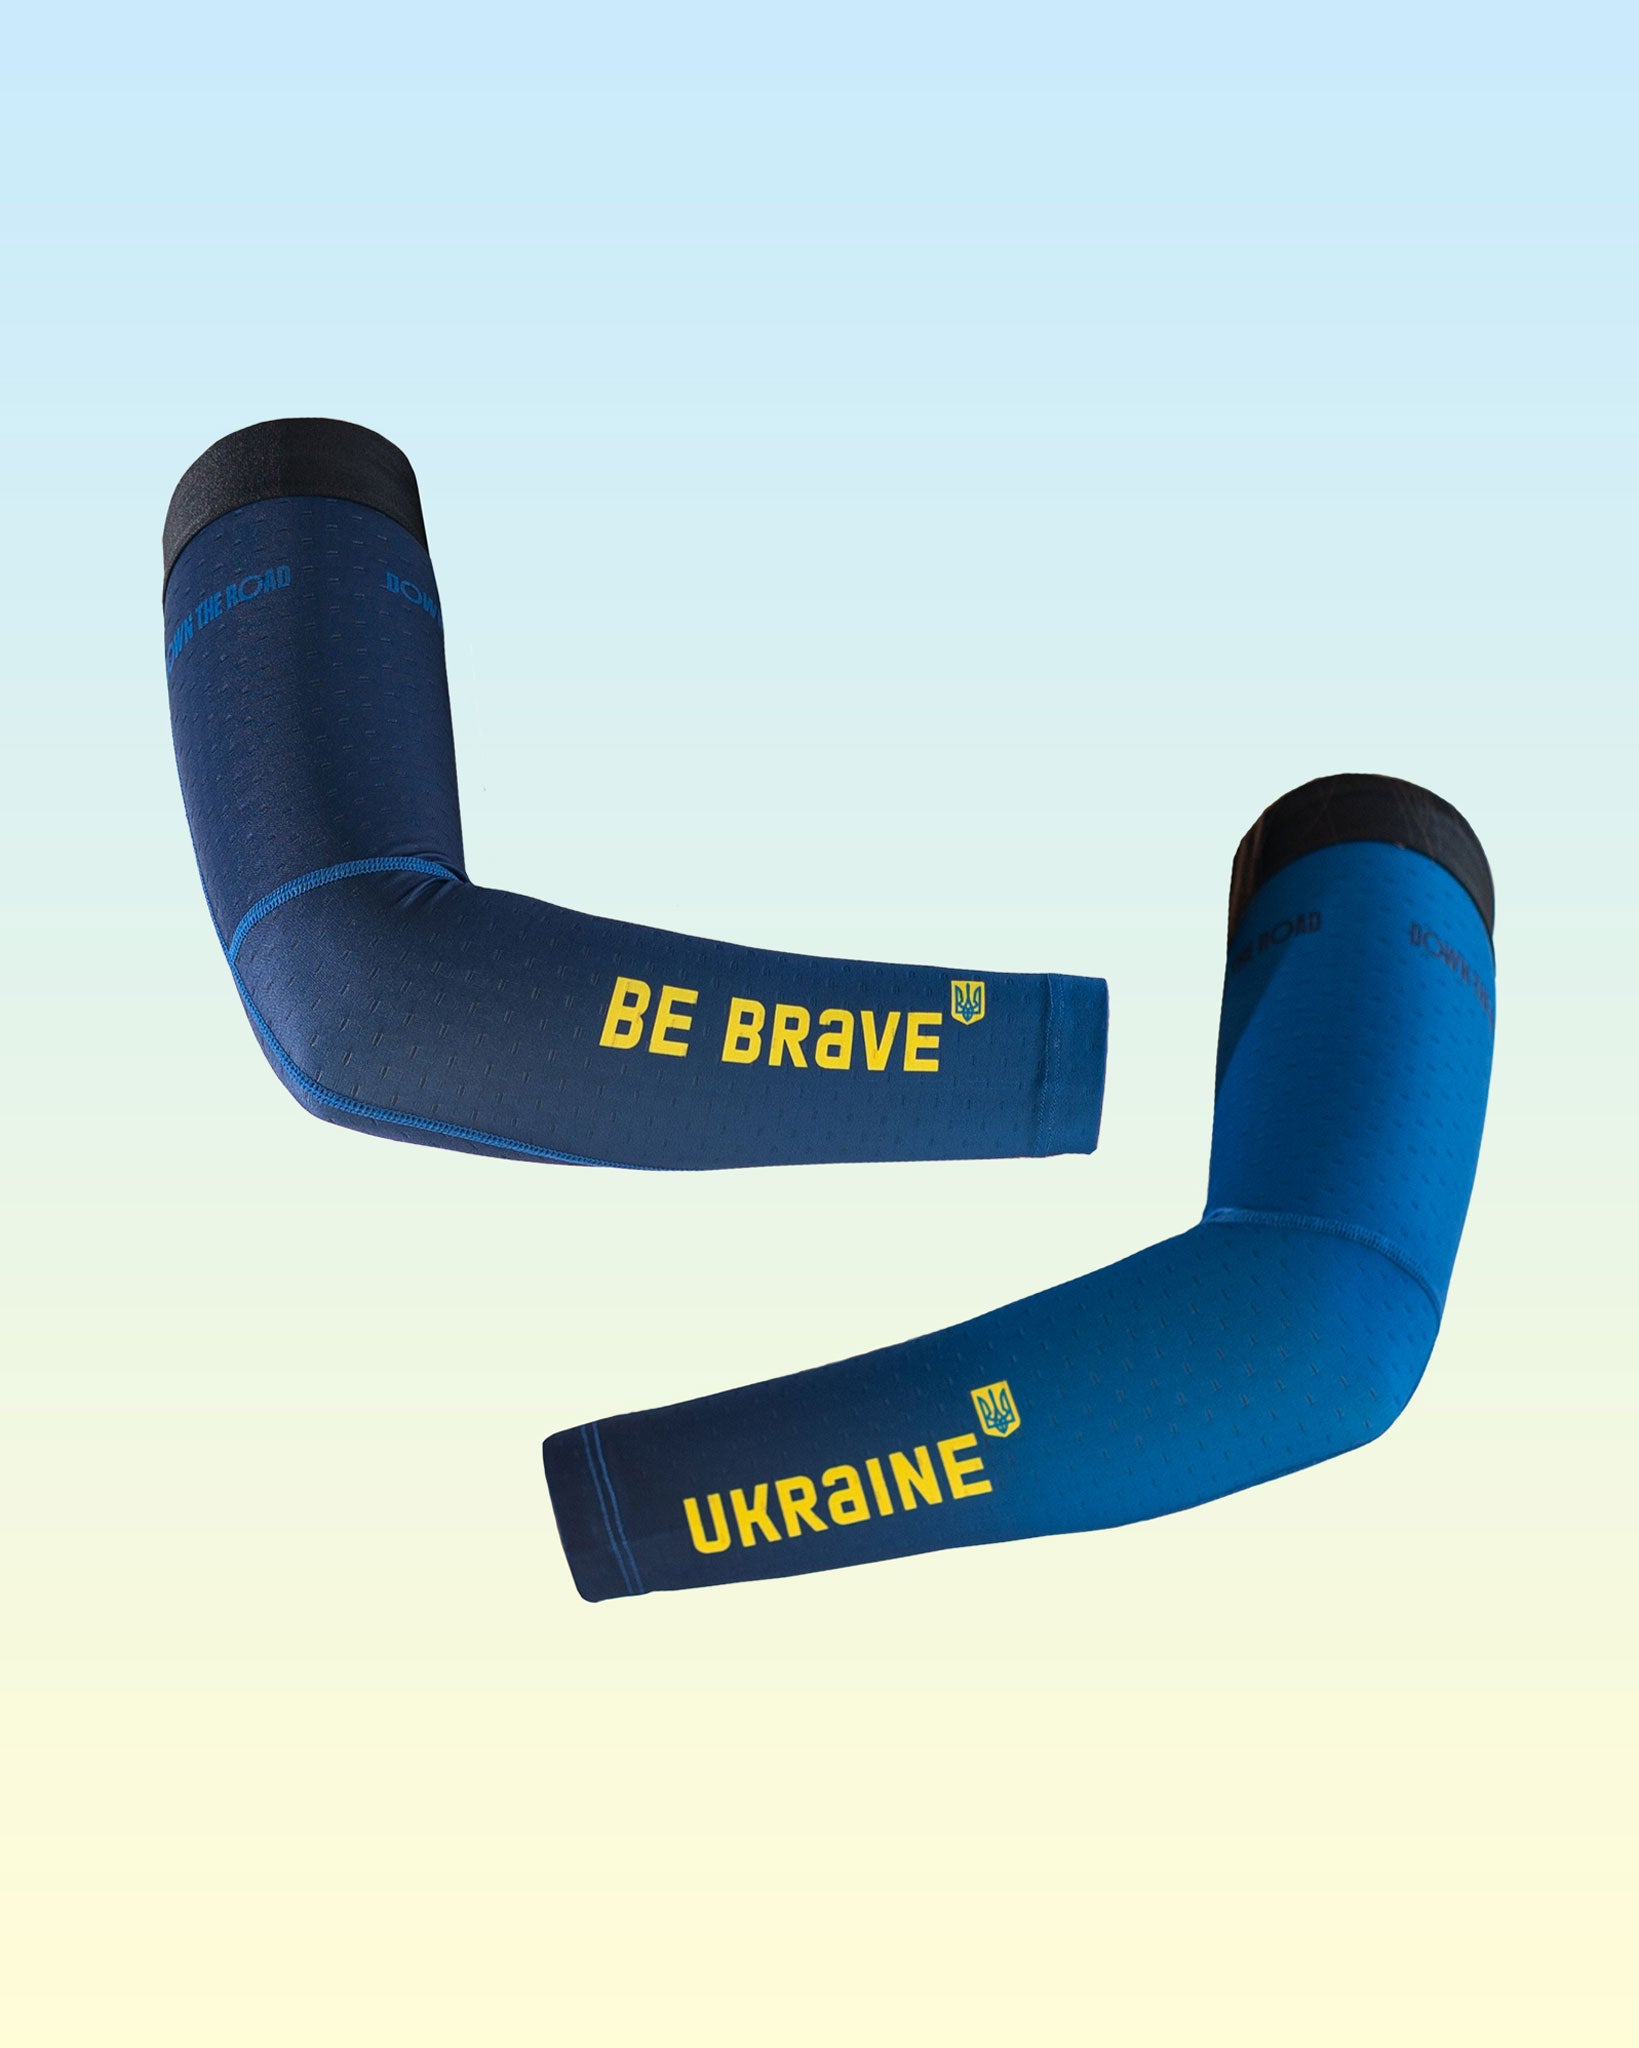 be brave like ukraine sleeves for sports